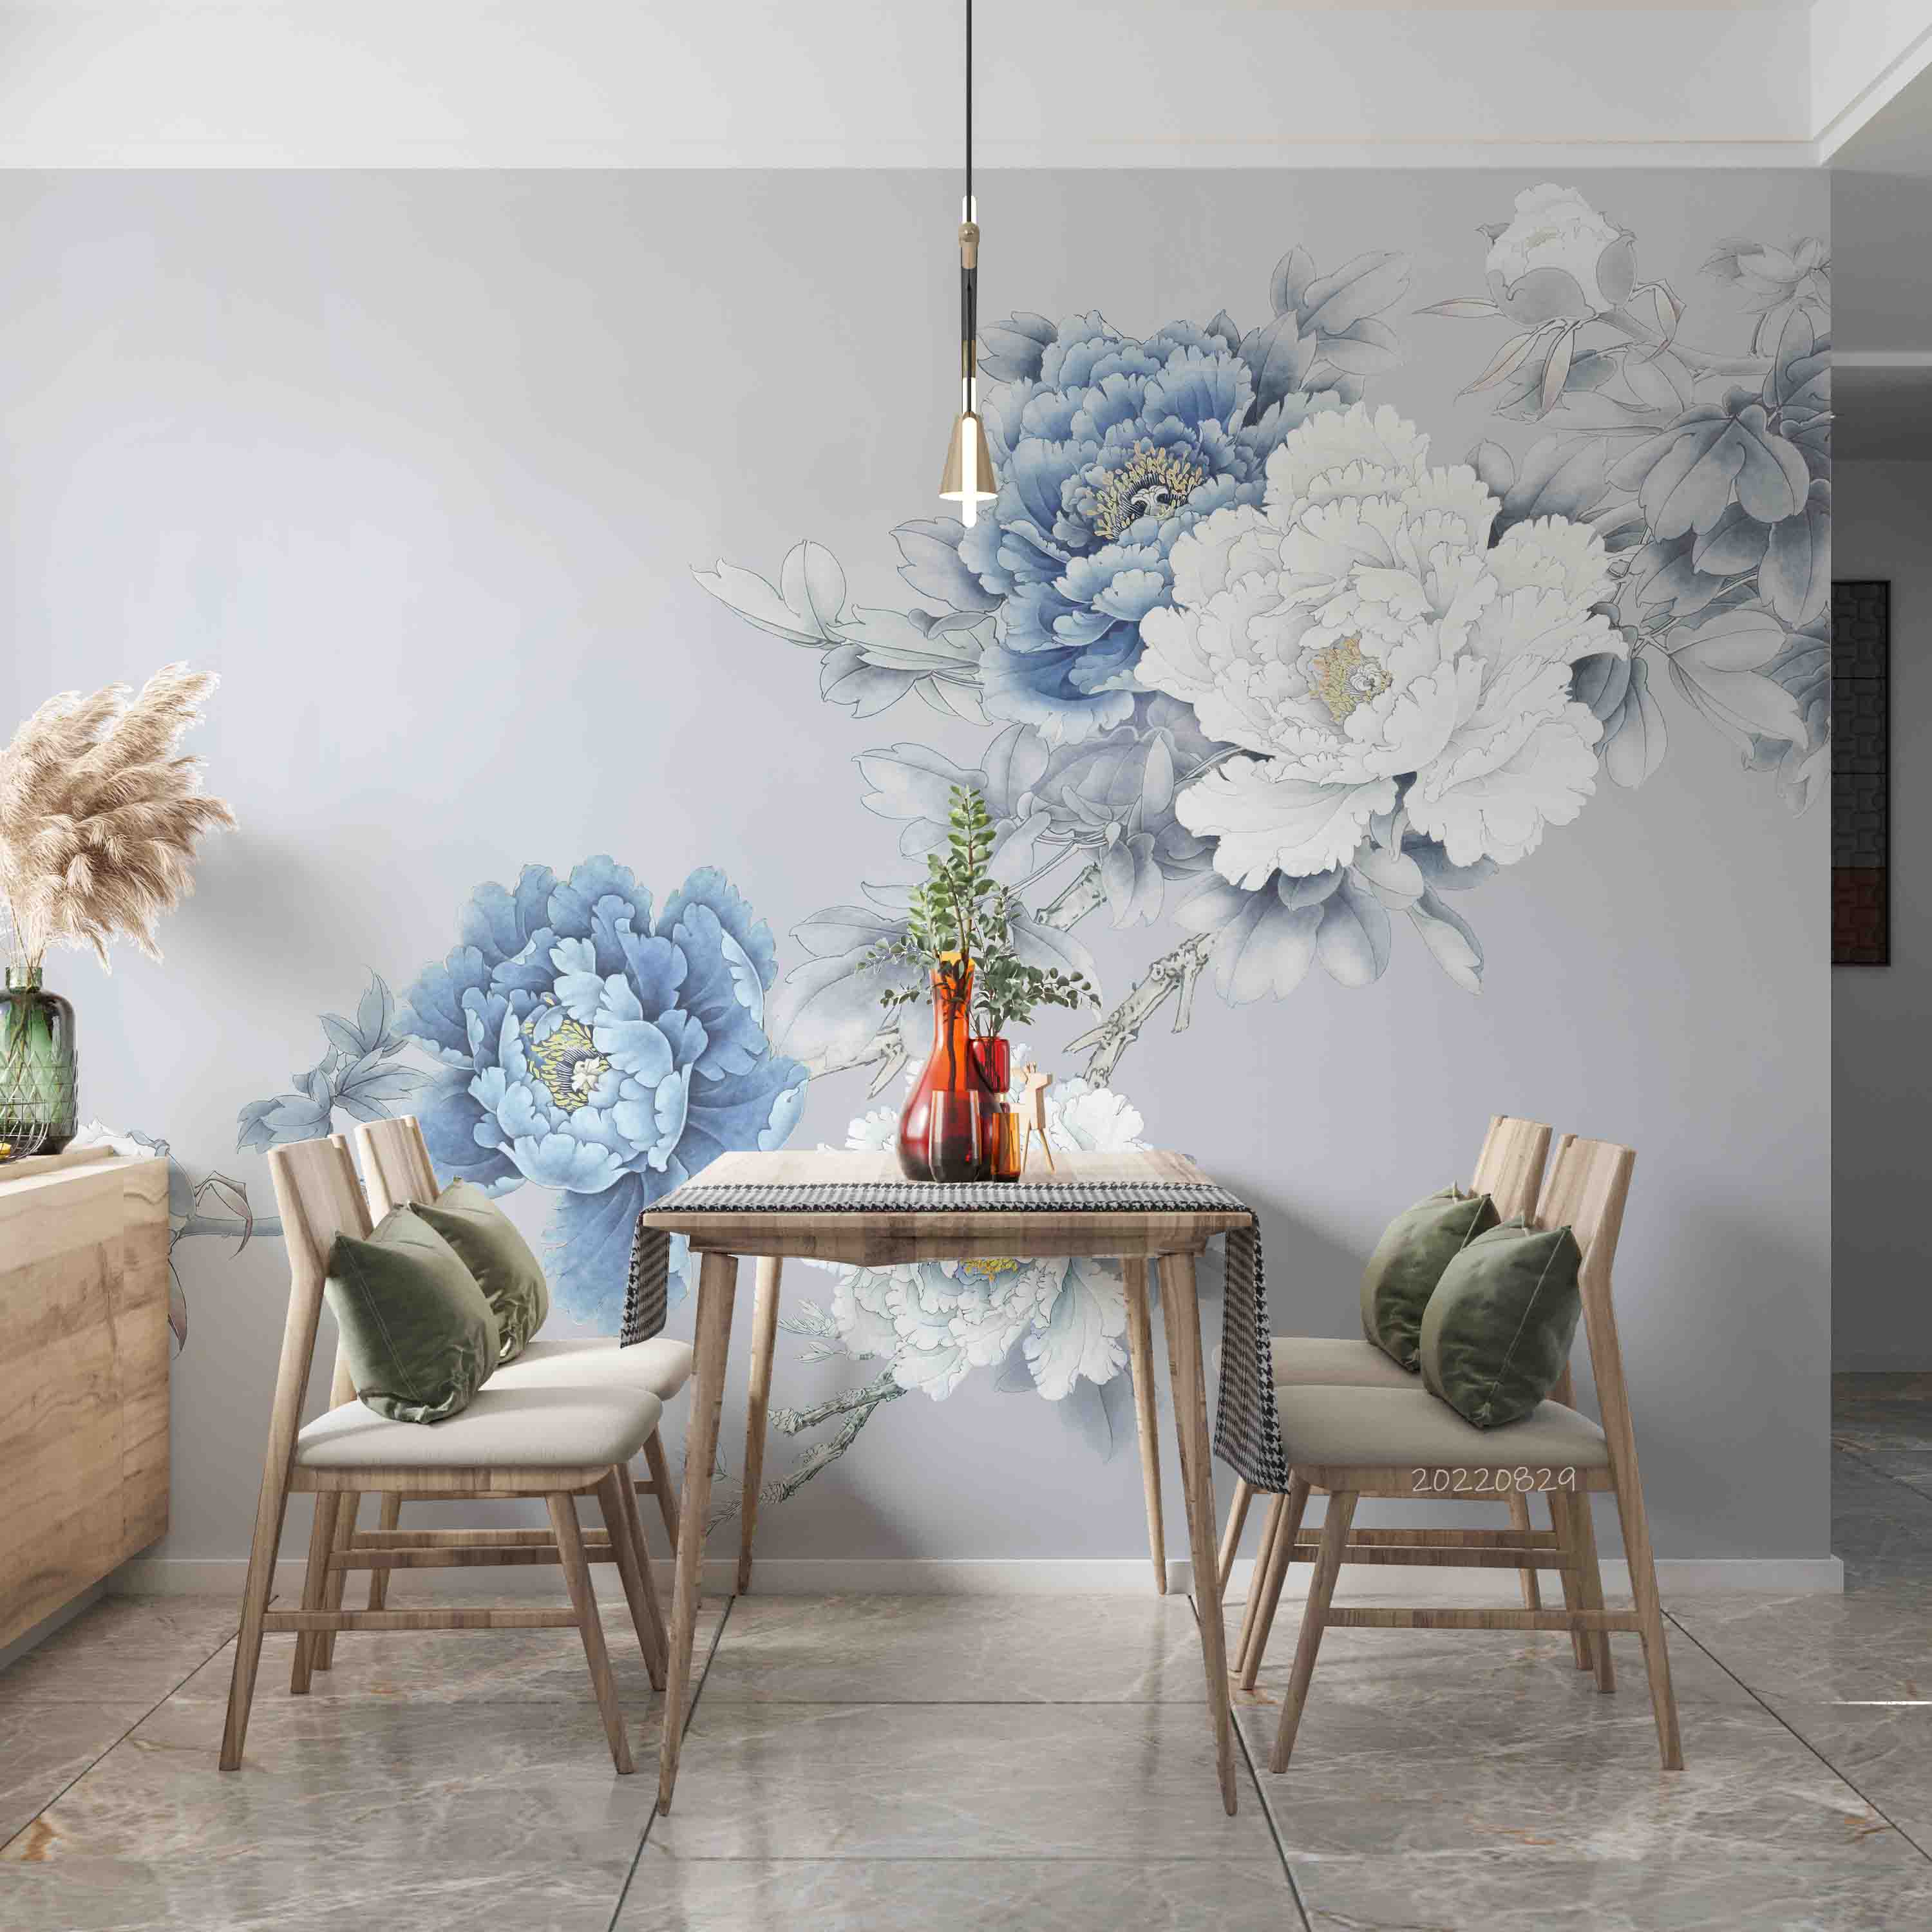 3D Vintage Peony Floral White Blue Wall Mural Wallpaper GD 2689- Jess Art Decoration